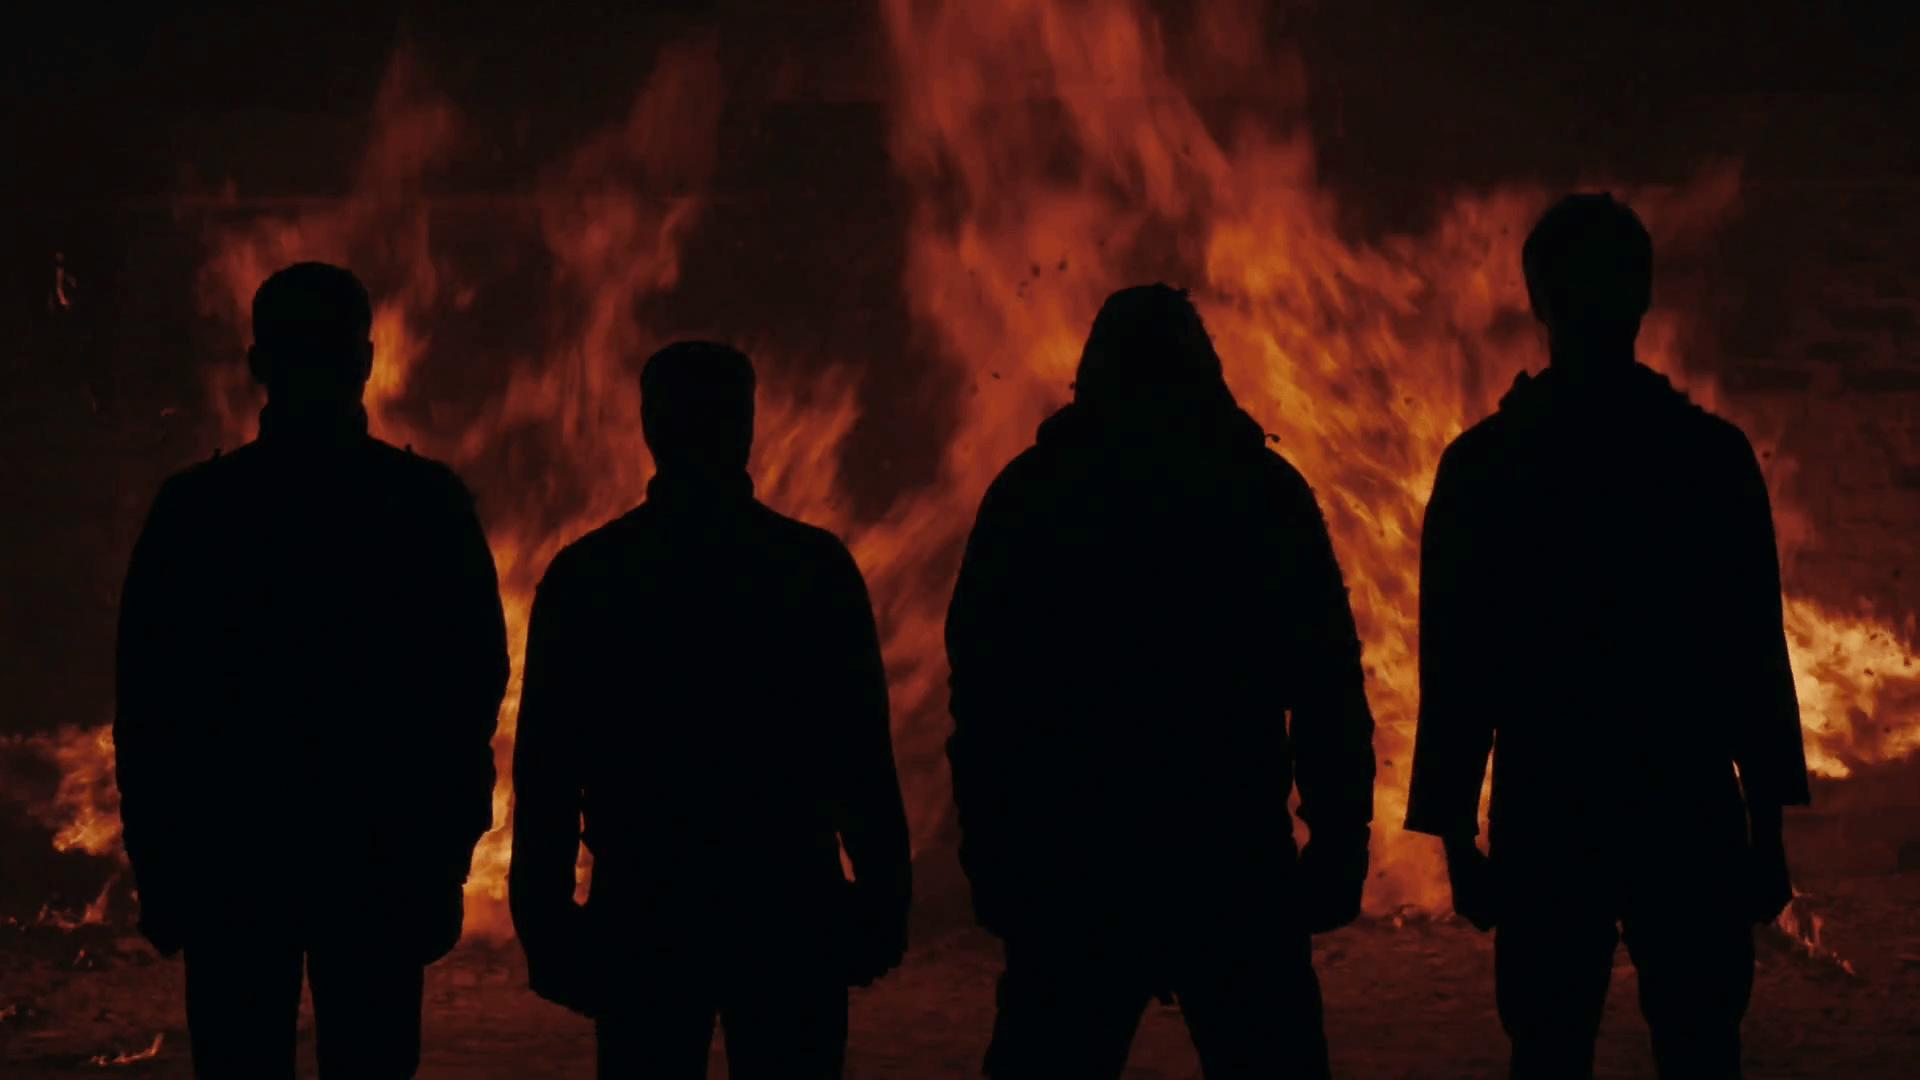 Four man silhouette standing on fire flames background. Silhouette